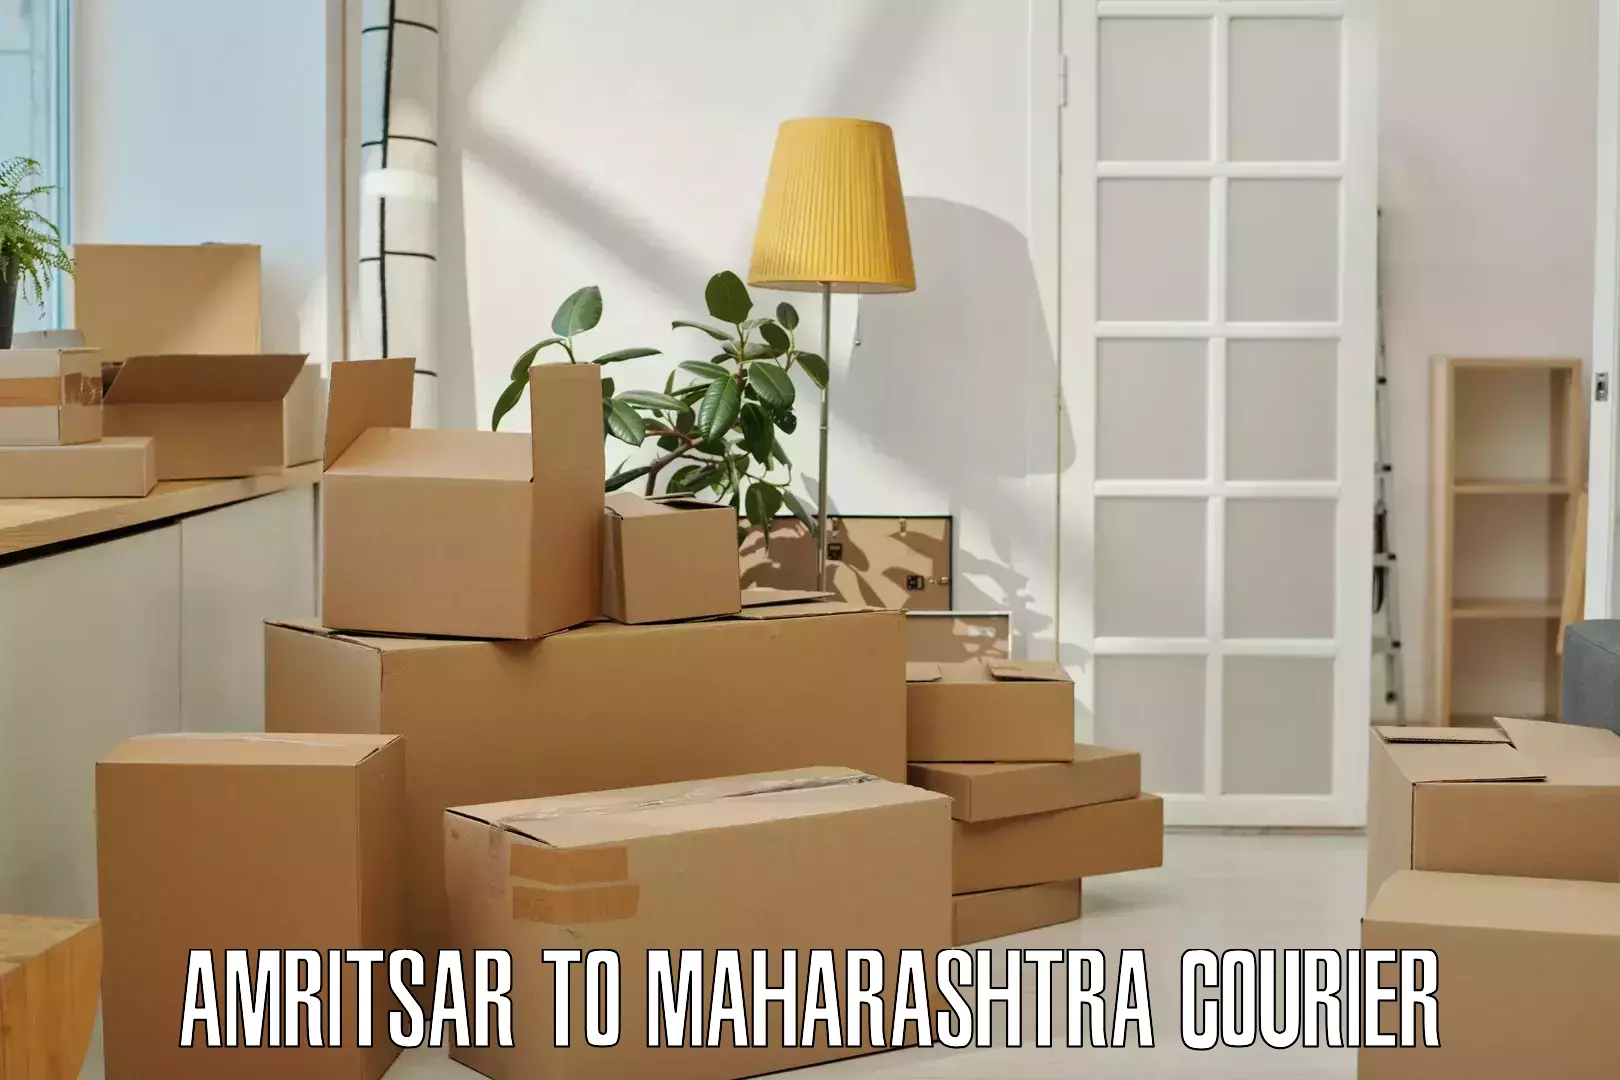 Courier service partnerships Amritsar to Daryapur